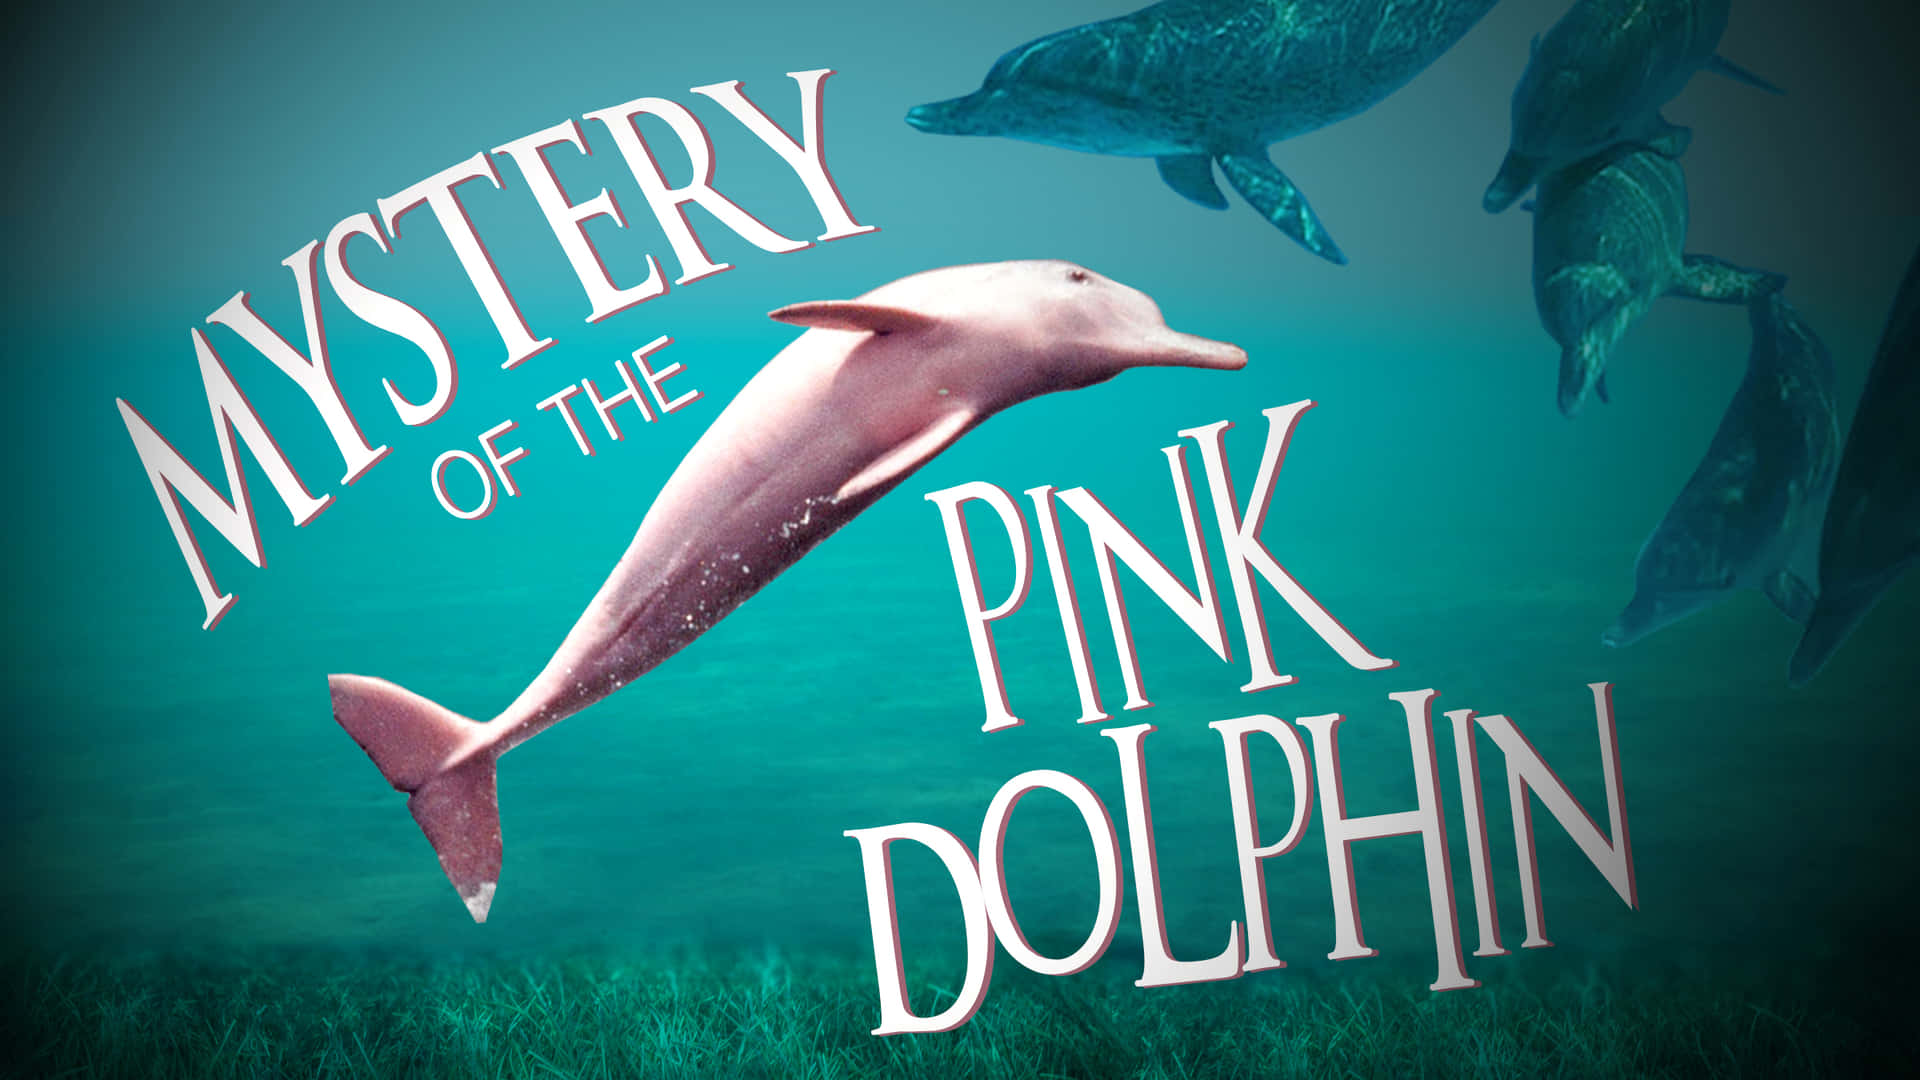 Image A Pink Dolphin Swimming In An Ocean. Background